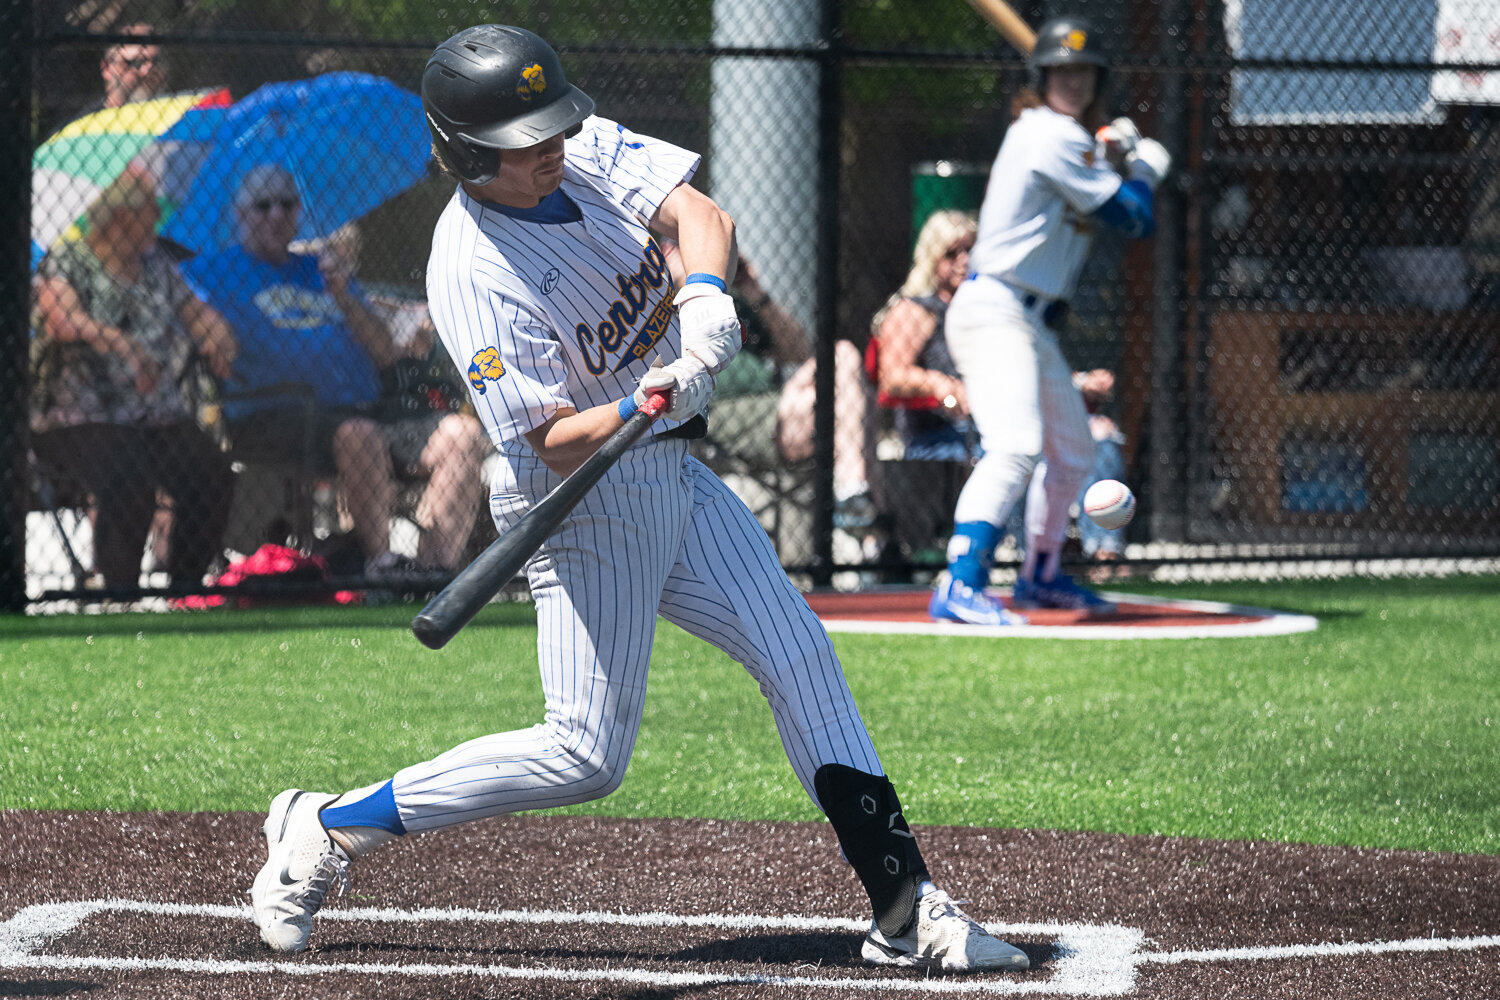 Jaden Fulsher makes contact during Centralia College's first game against LCC on May 12.